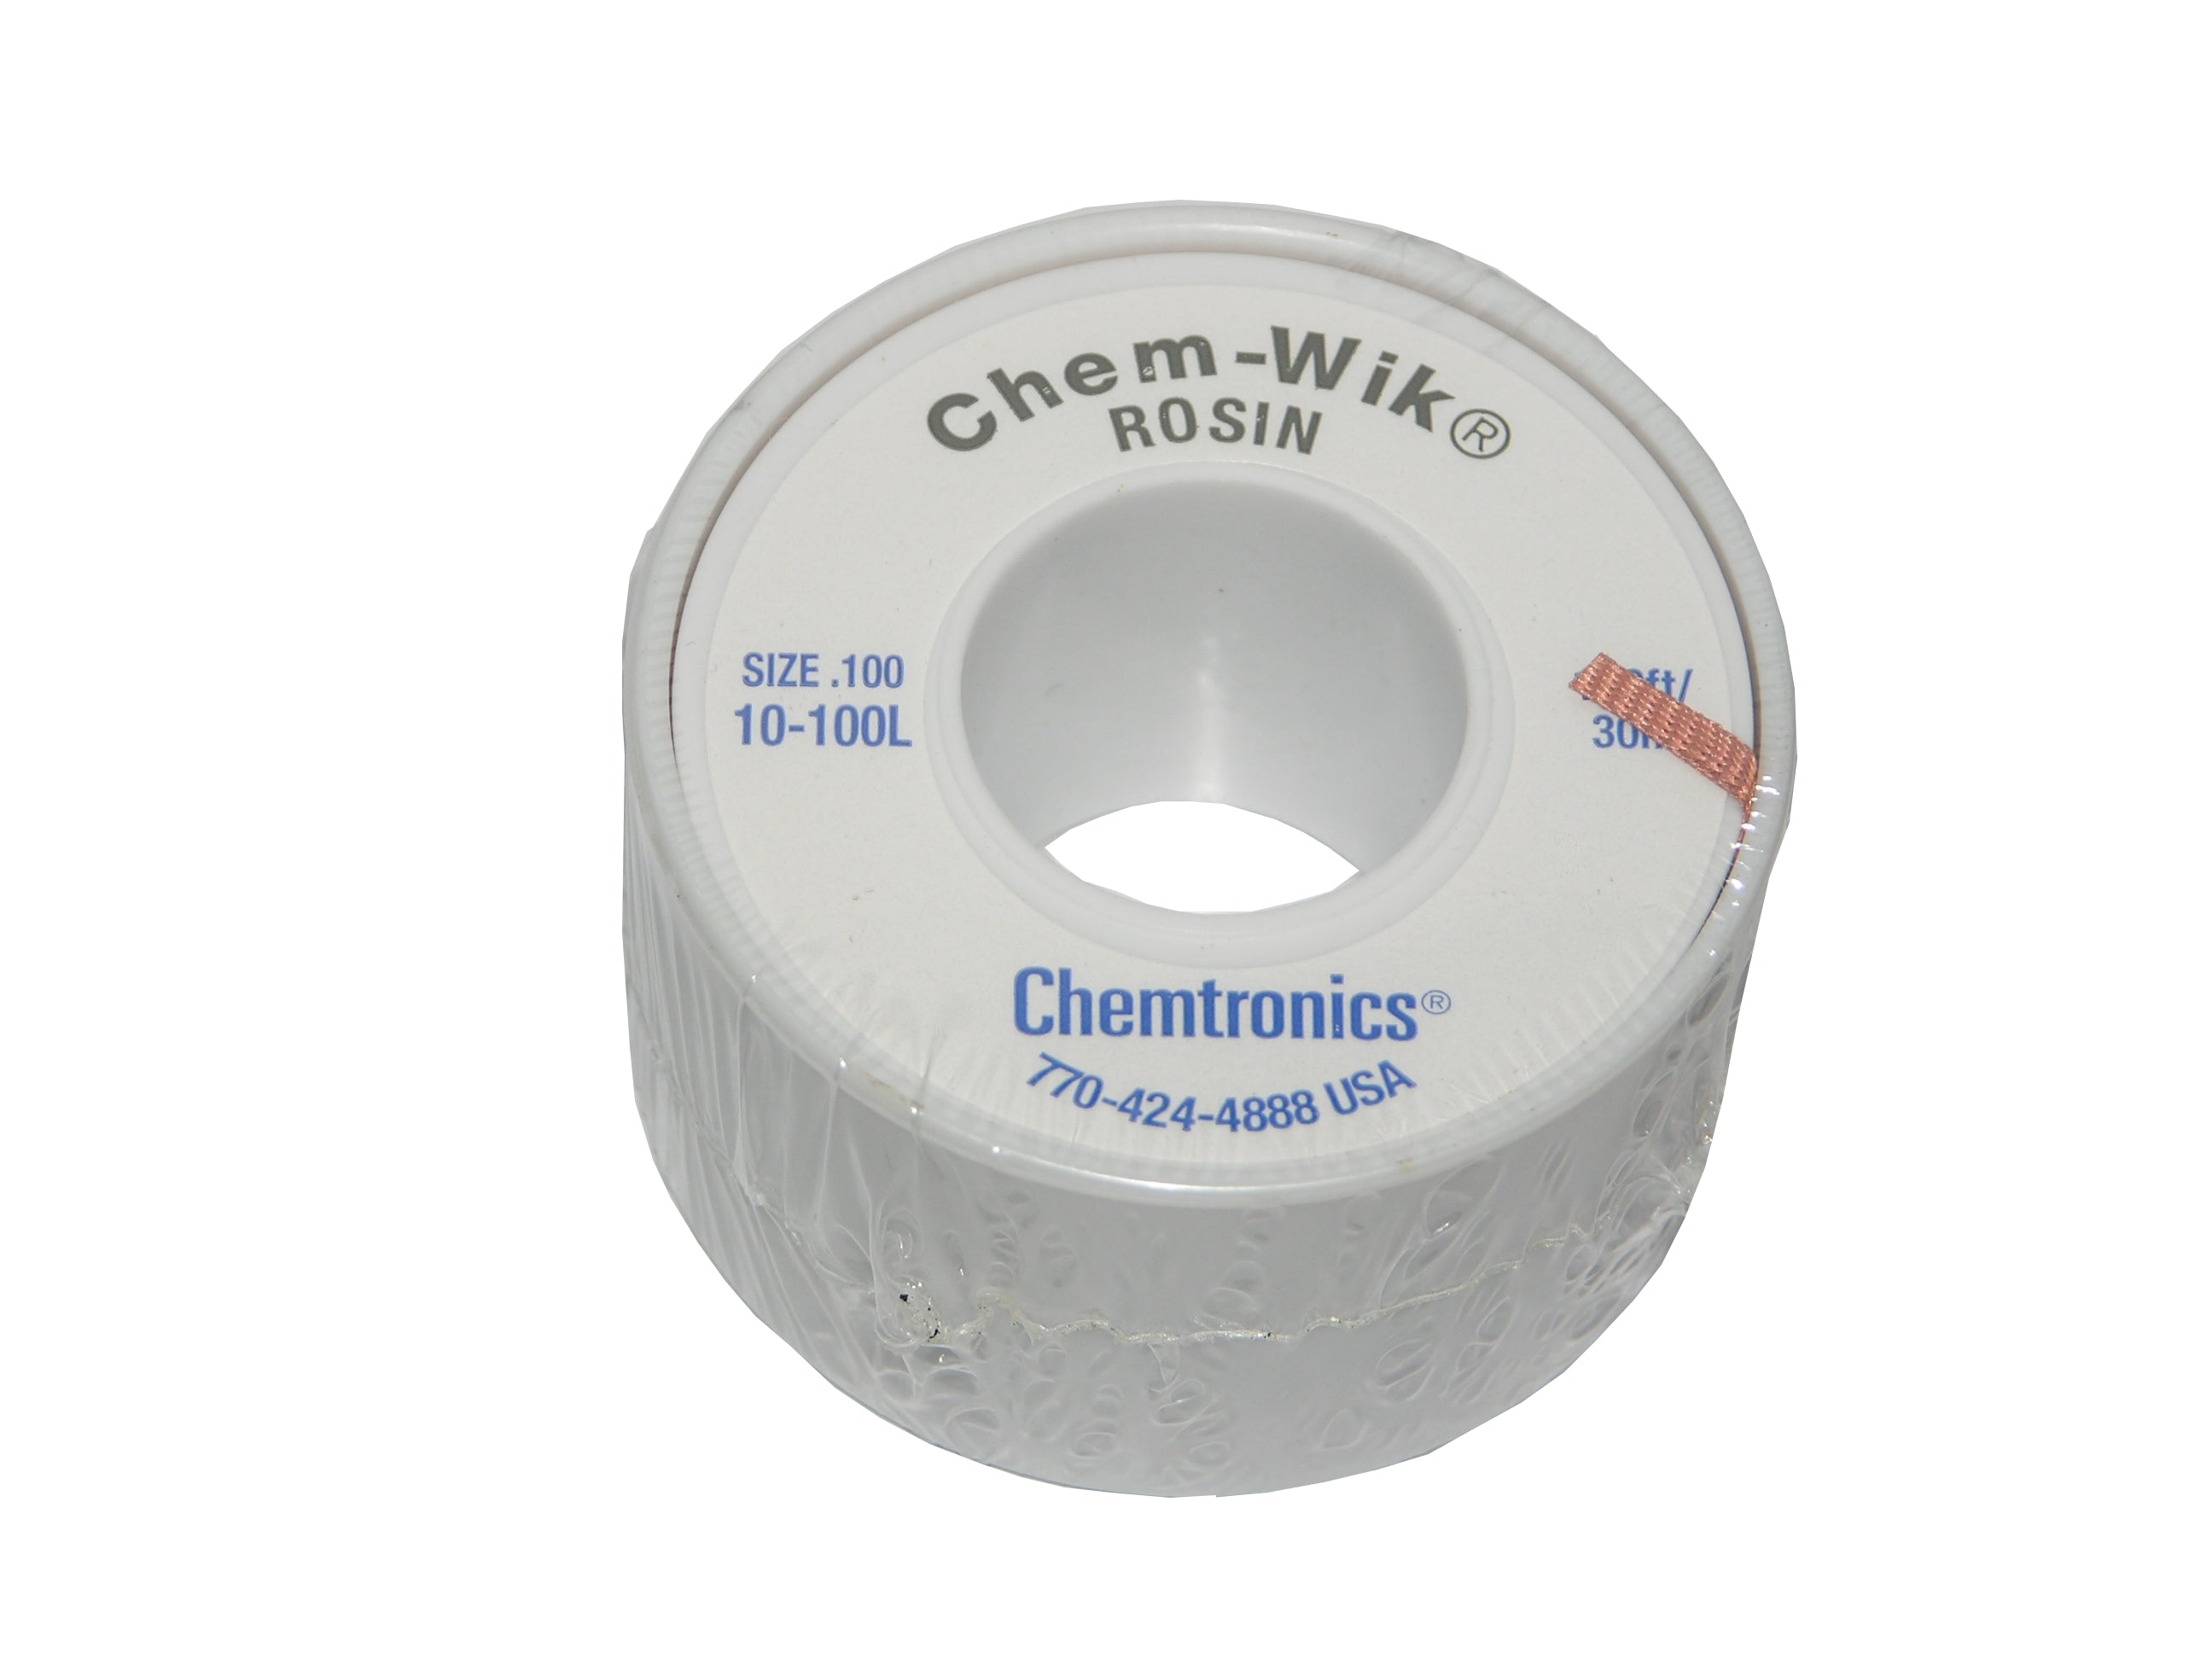 Chemtronics, Chemtronics 10-100L, 100' Solder Wic Braid For Solder Removal from Circuits